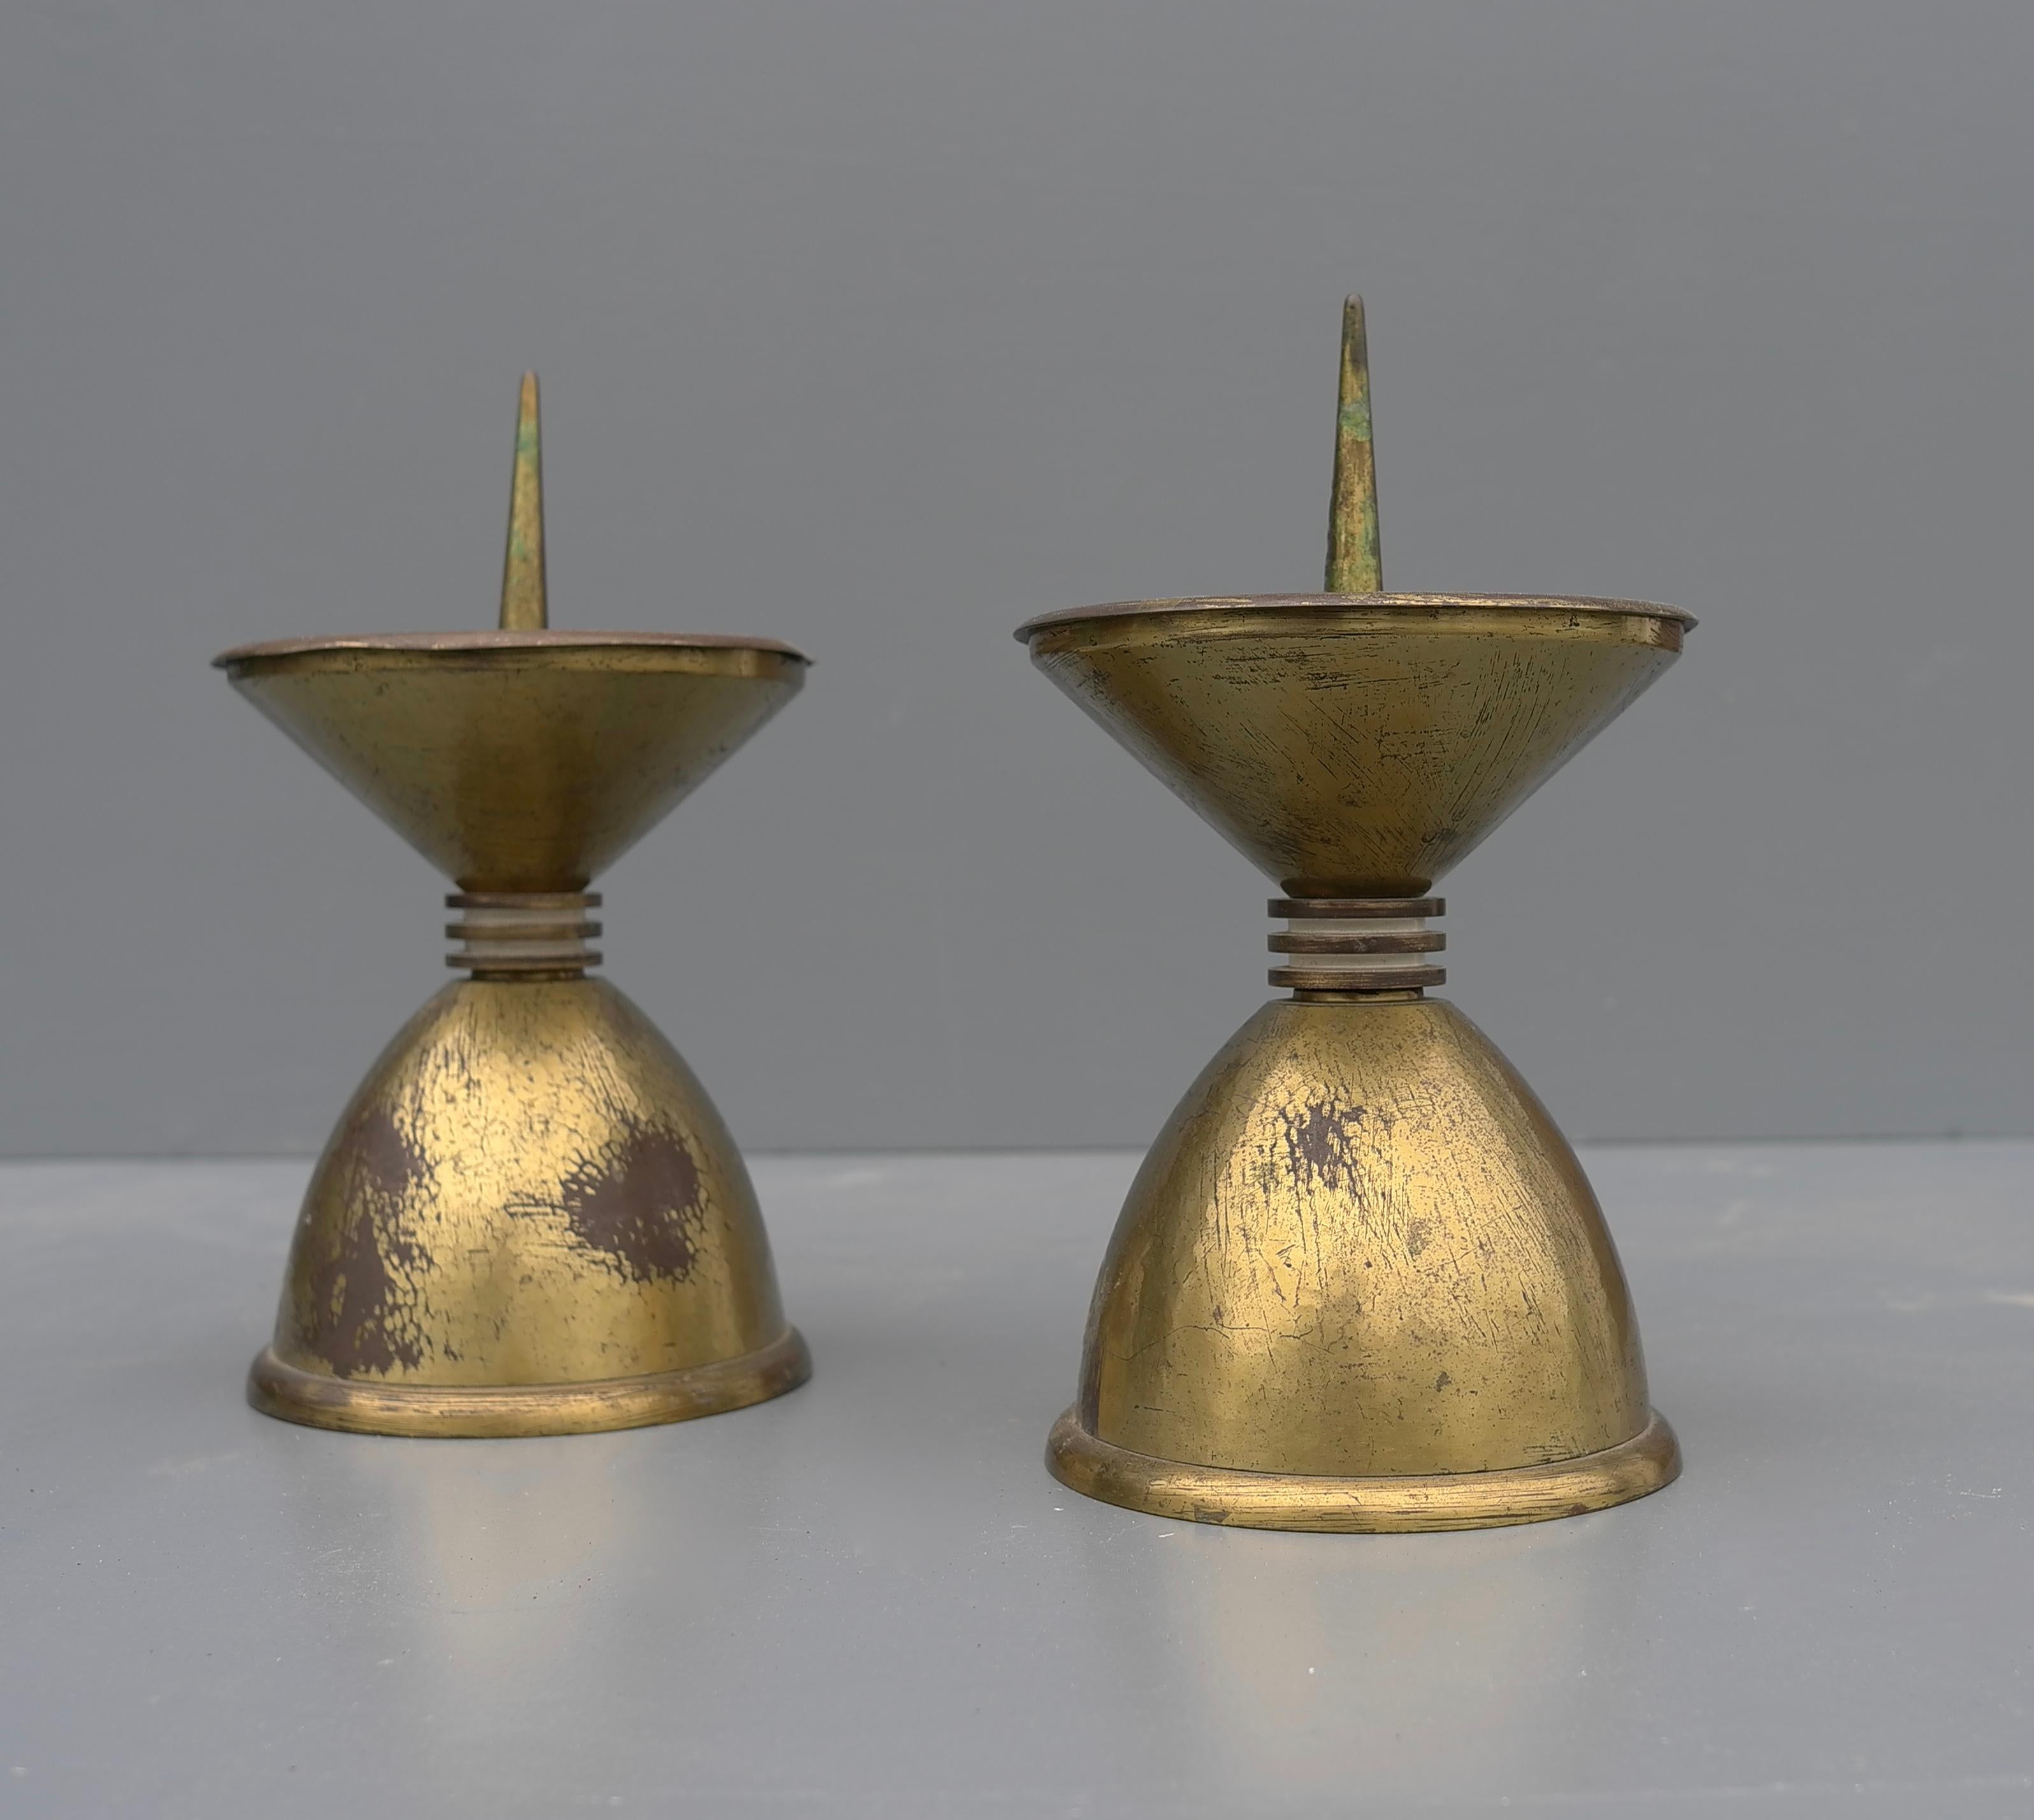 Pair of large Art Deco bronze and brass candle holders, France, 1930's.